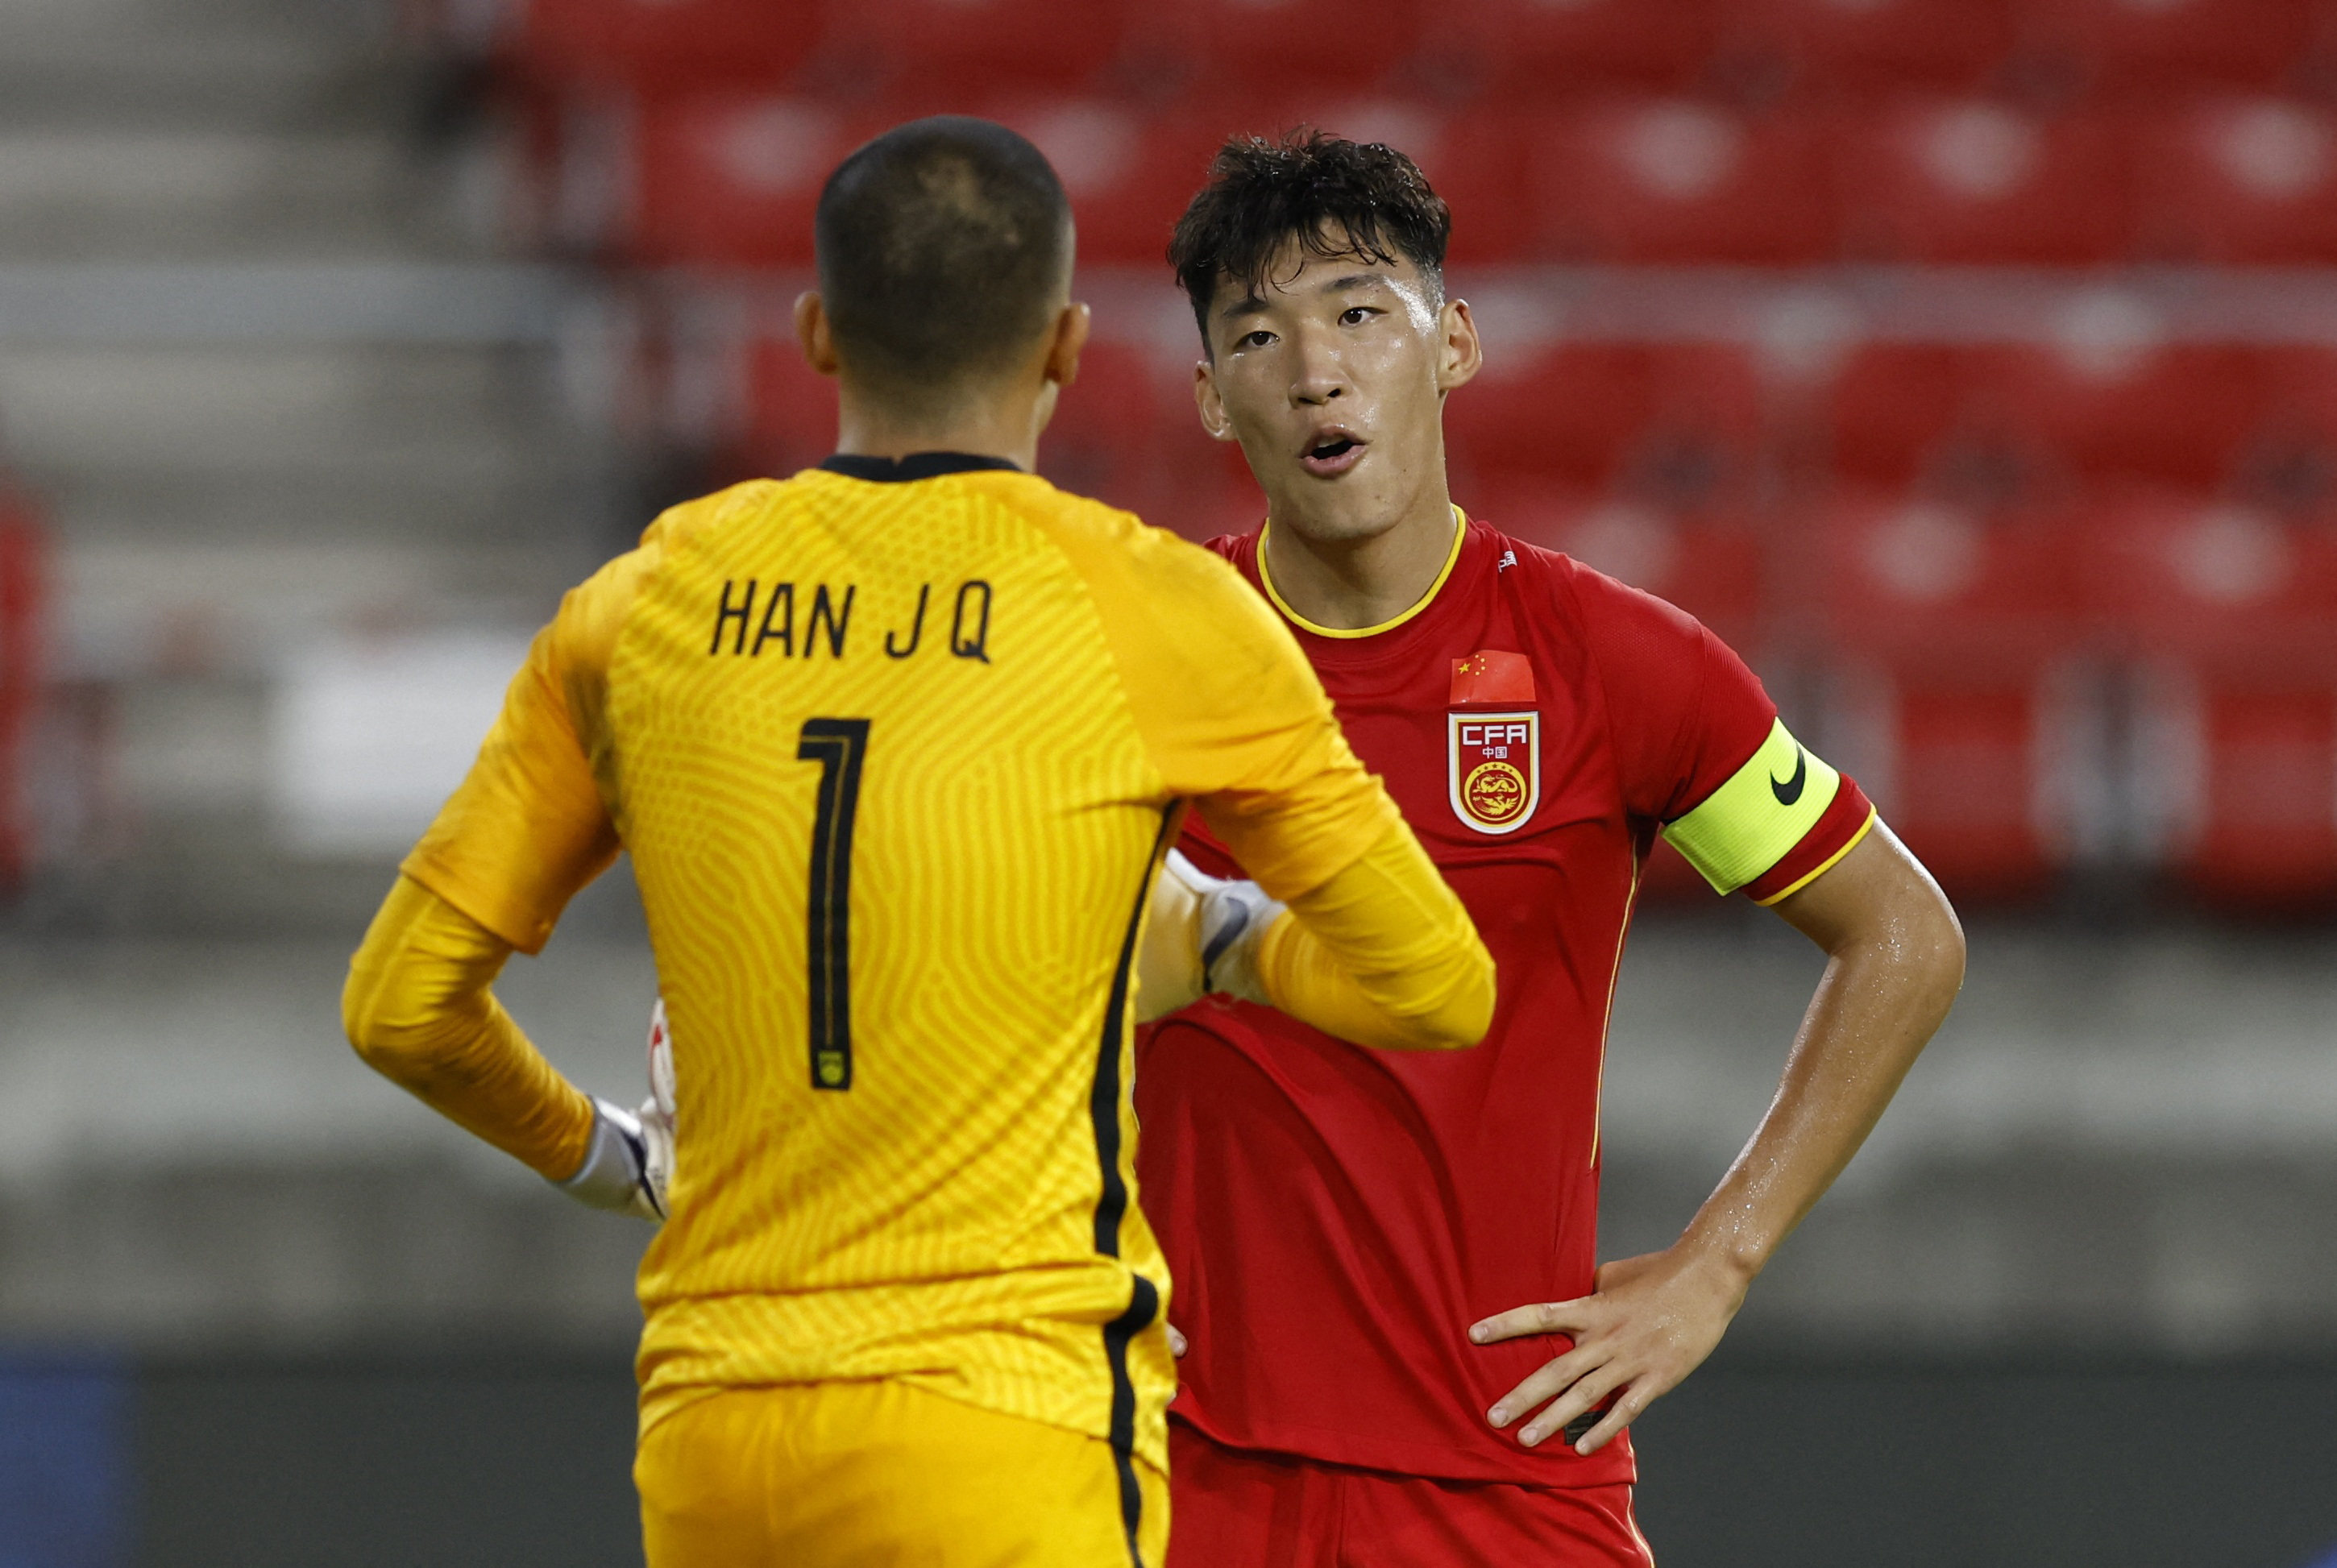 China’s Zhu Chenije (right) talks to goalkeeper Han Jiaqi after scoring an own goal against South Korea. Photo: Reuters